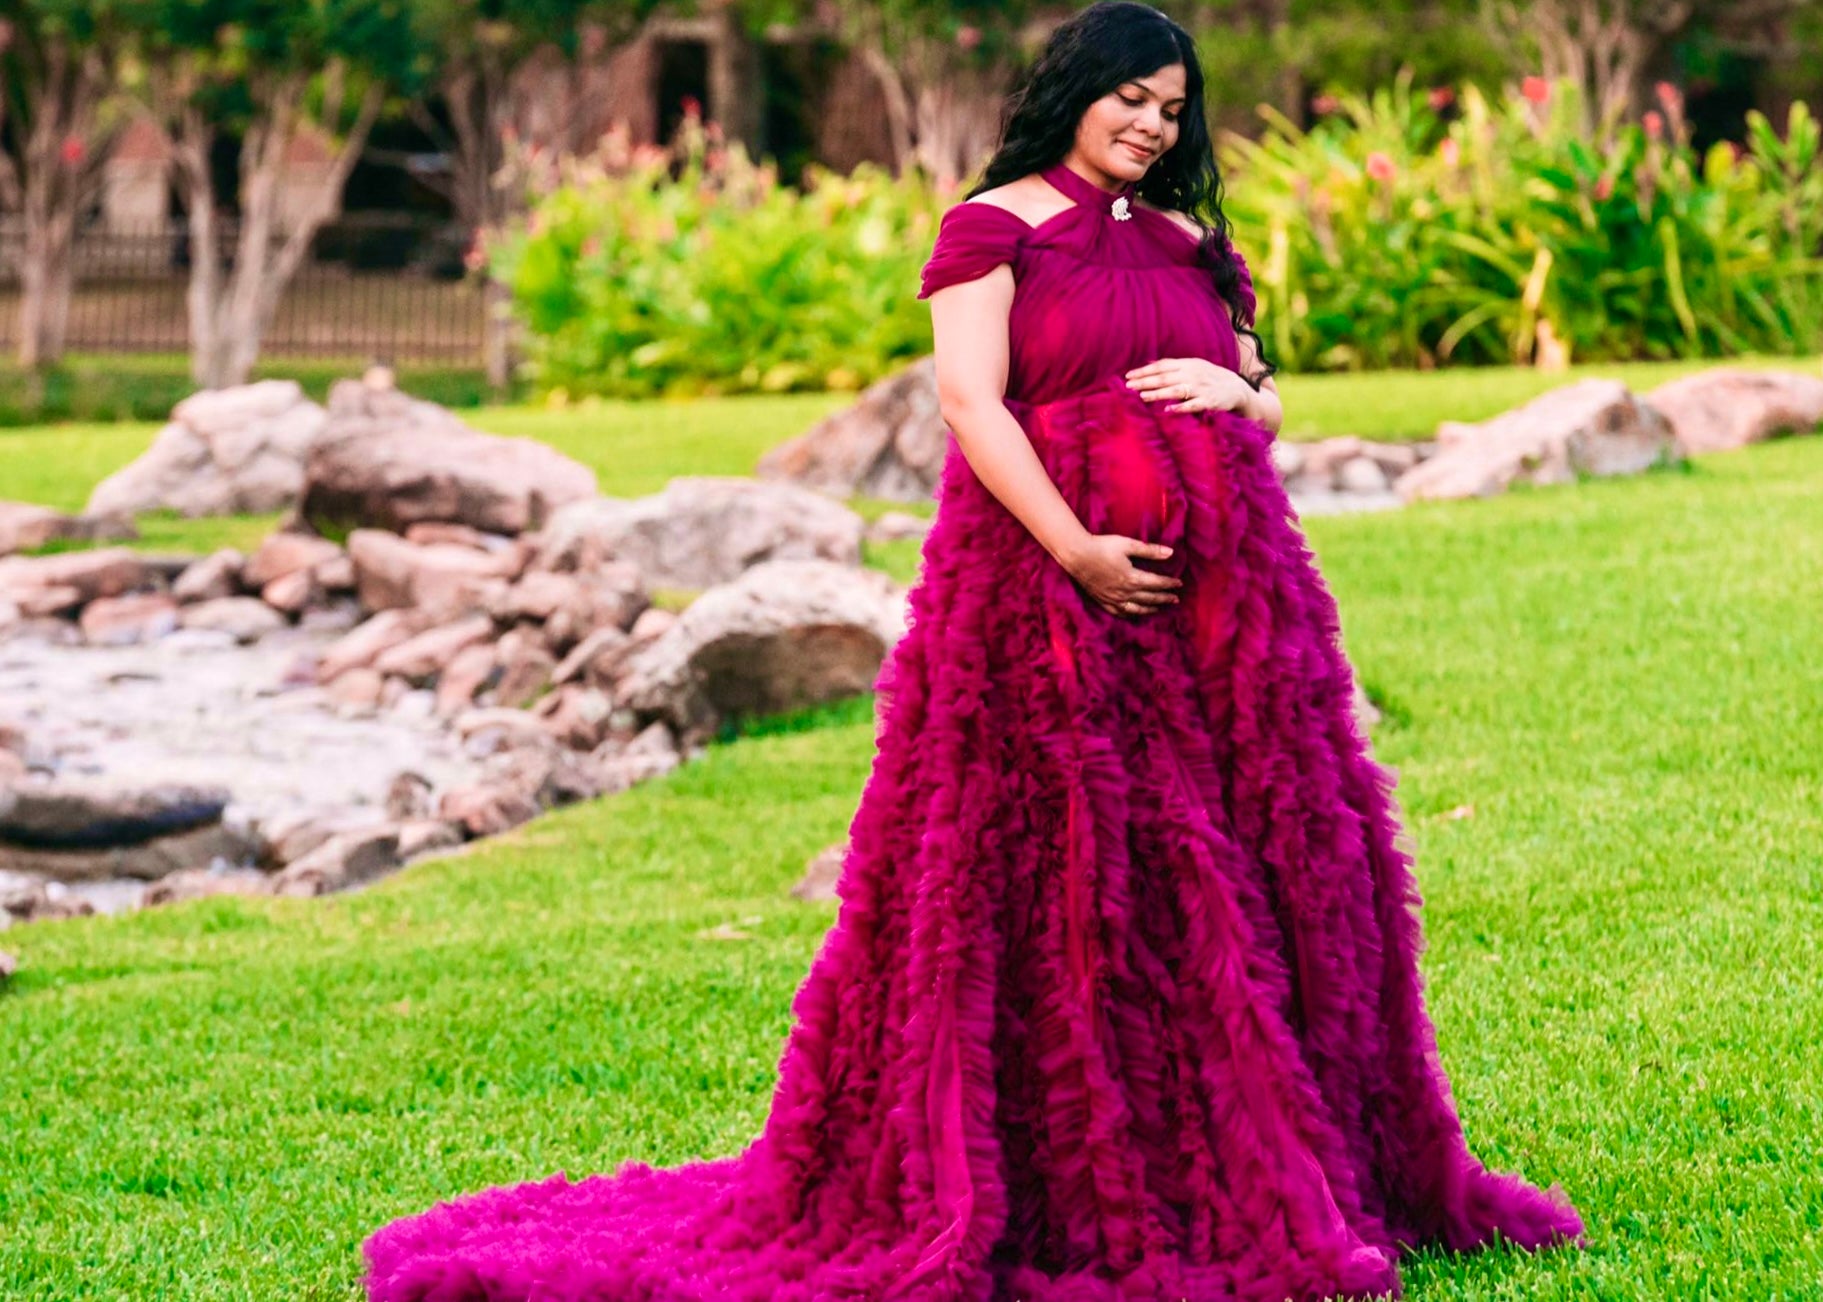 PINK TRAIL PRE WEDDING PHOTOSHOOT DRESS FOR RENT - We Dress